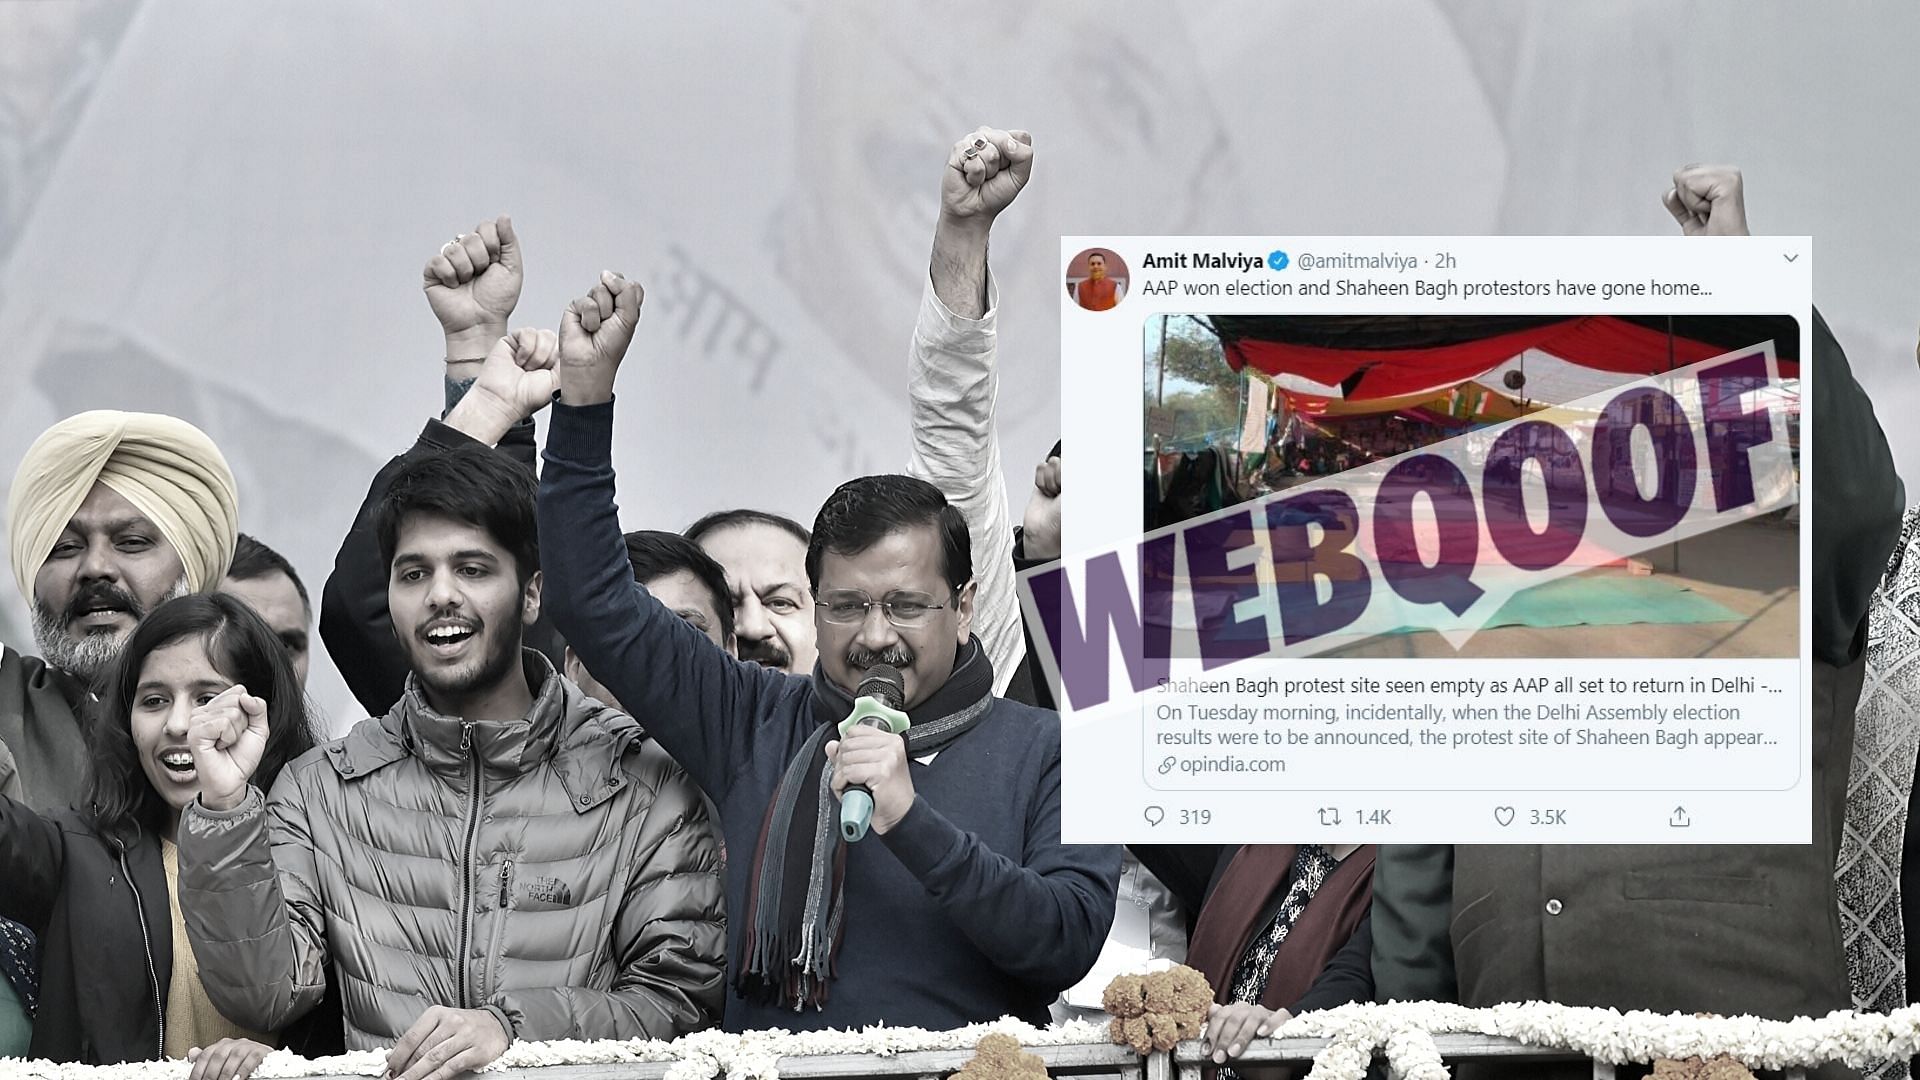 A report has been doing the rounds which claims that the protesters in Shaheen Bagh have emptied the area after AAP emerged victorious in the Delhi Assembly elections.